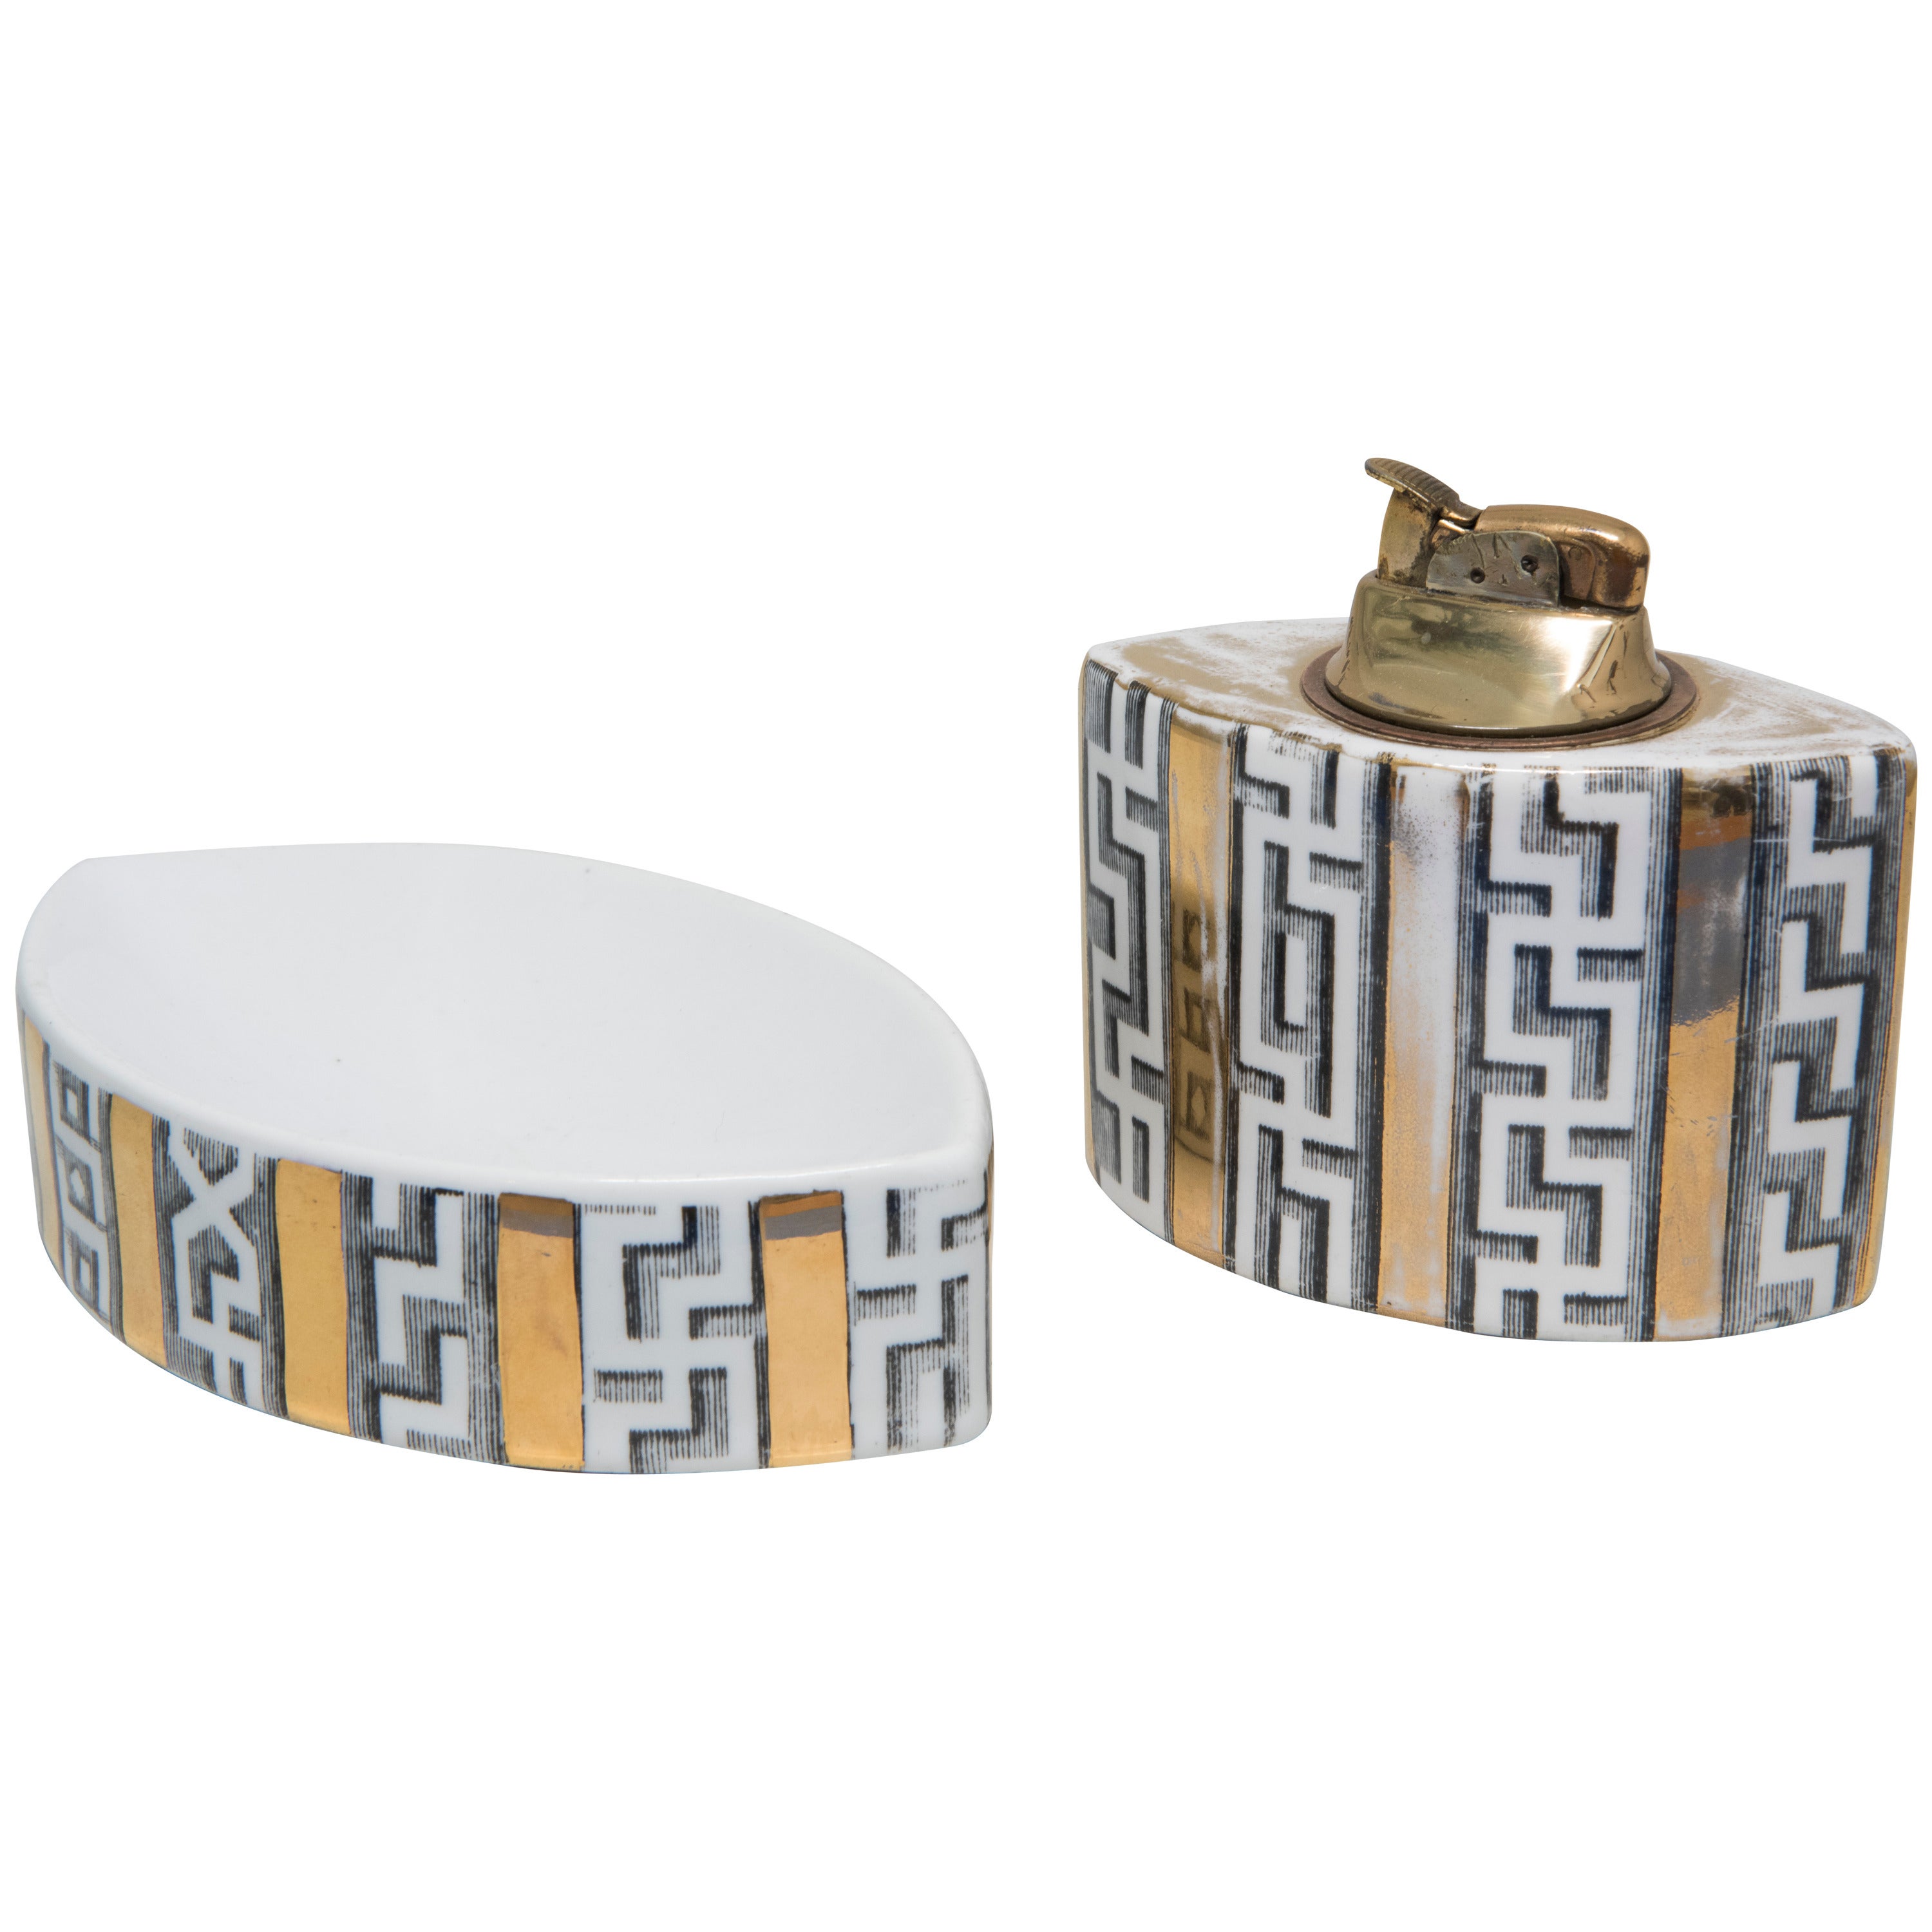 Ashtray and Lighter by Piero Fornasetti